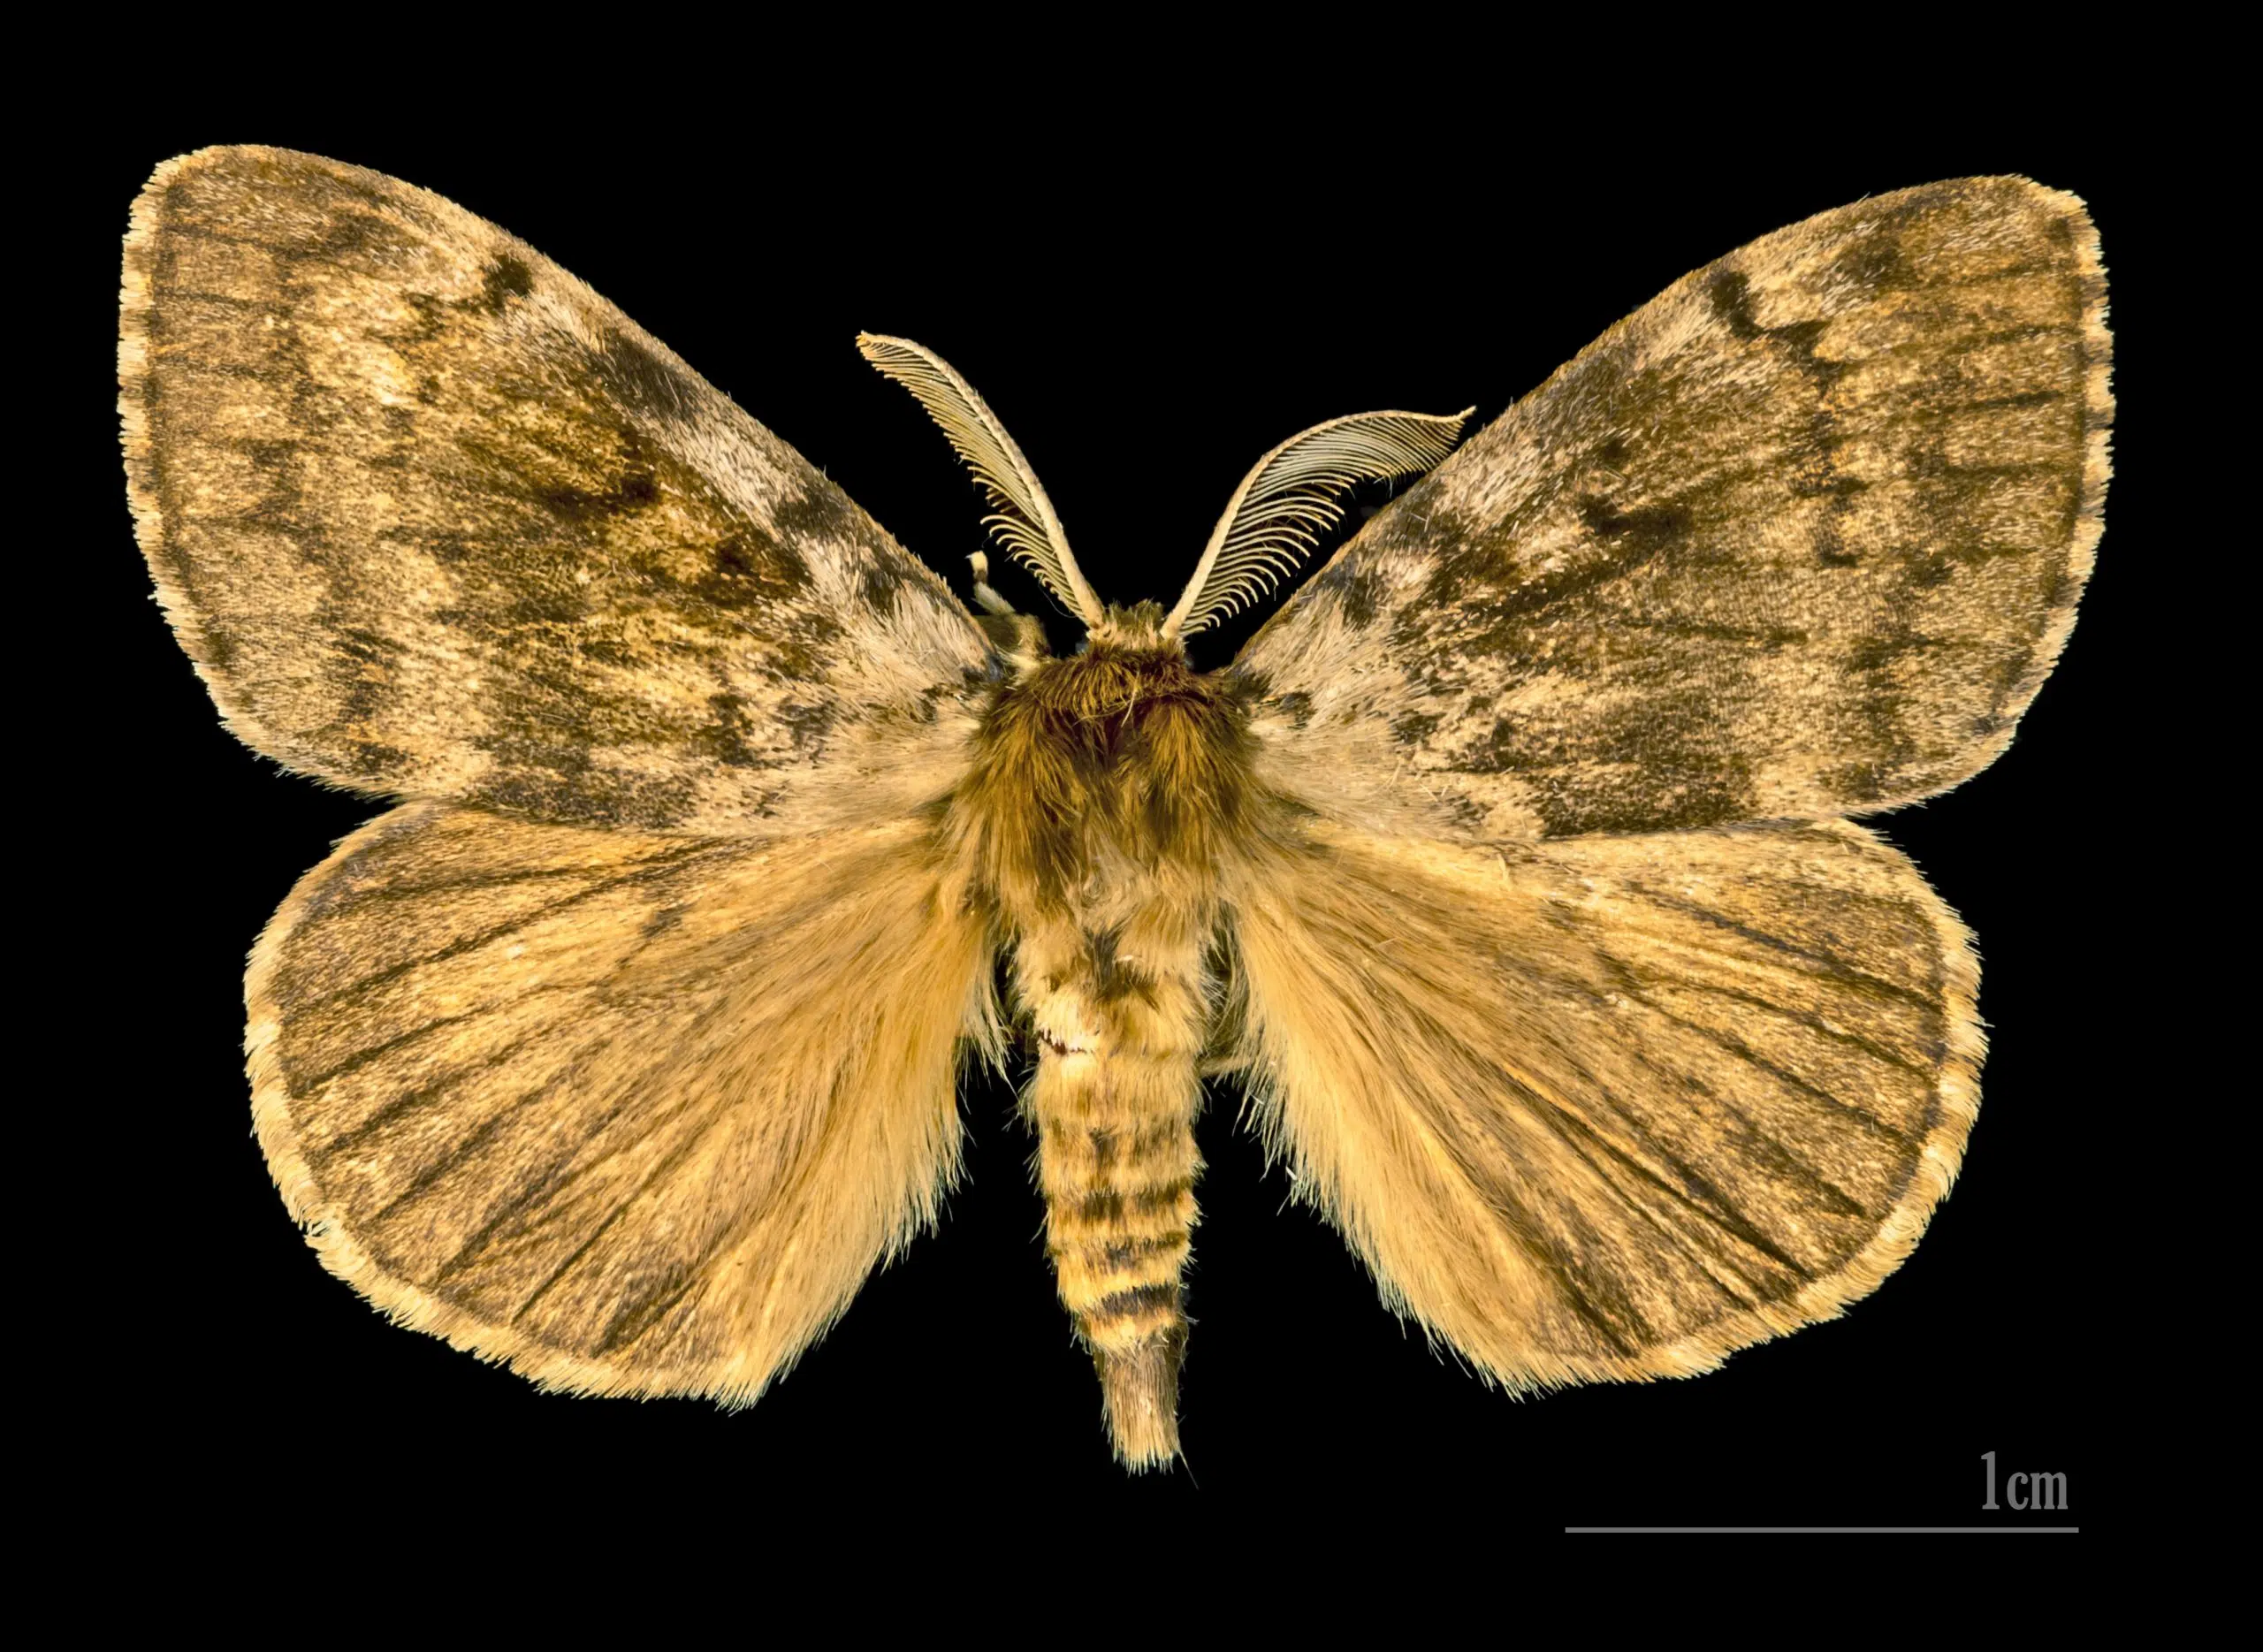 Quinte West council seeking regional support to push province to act on gypsy moth infestation